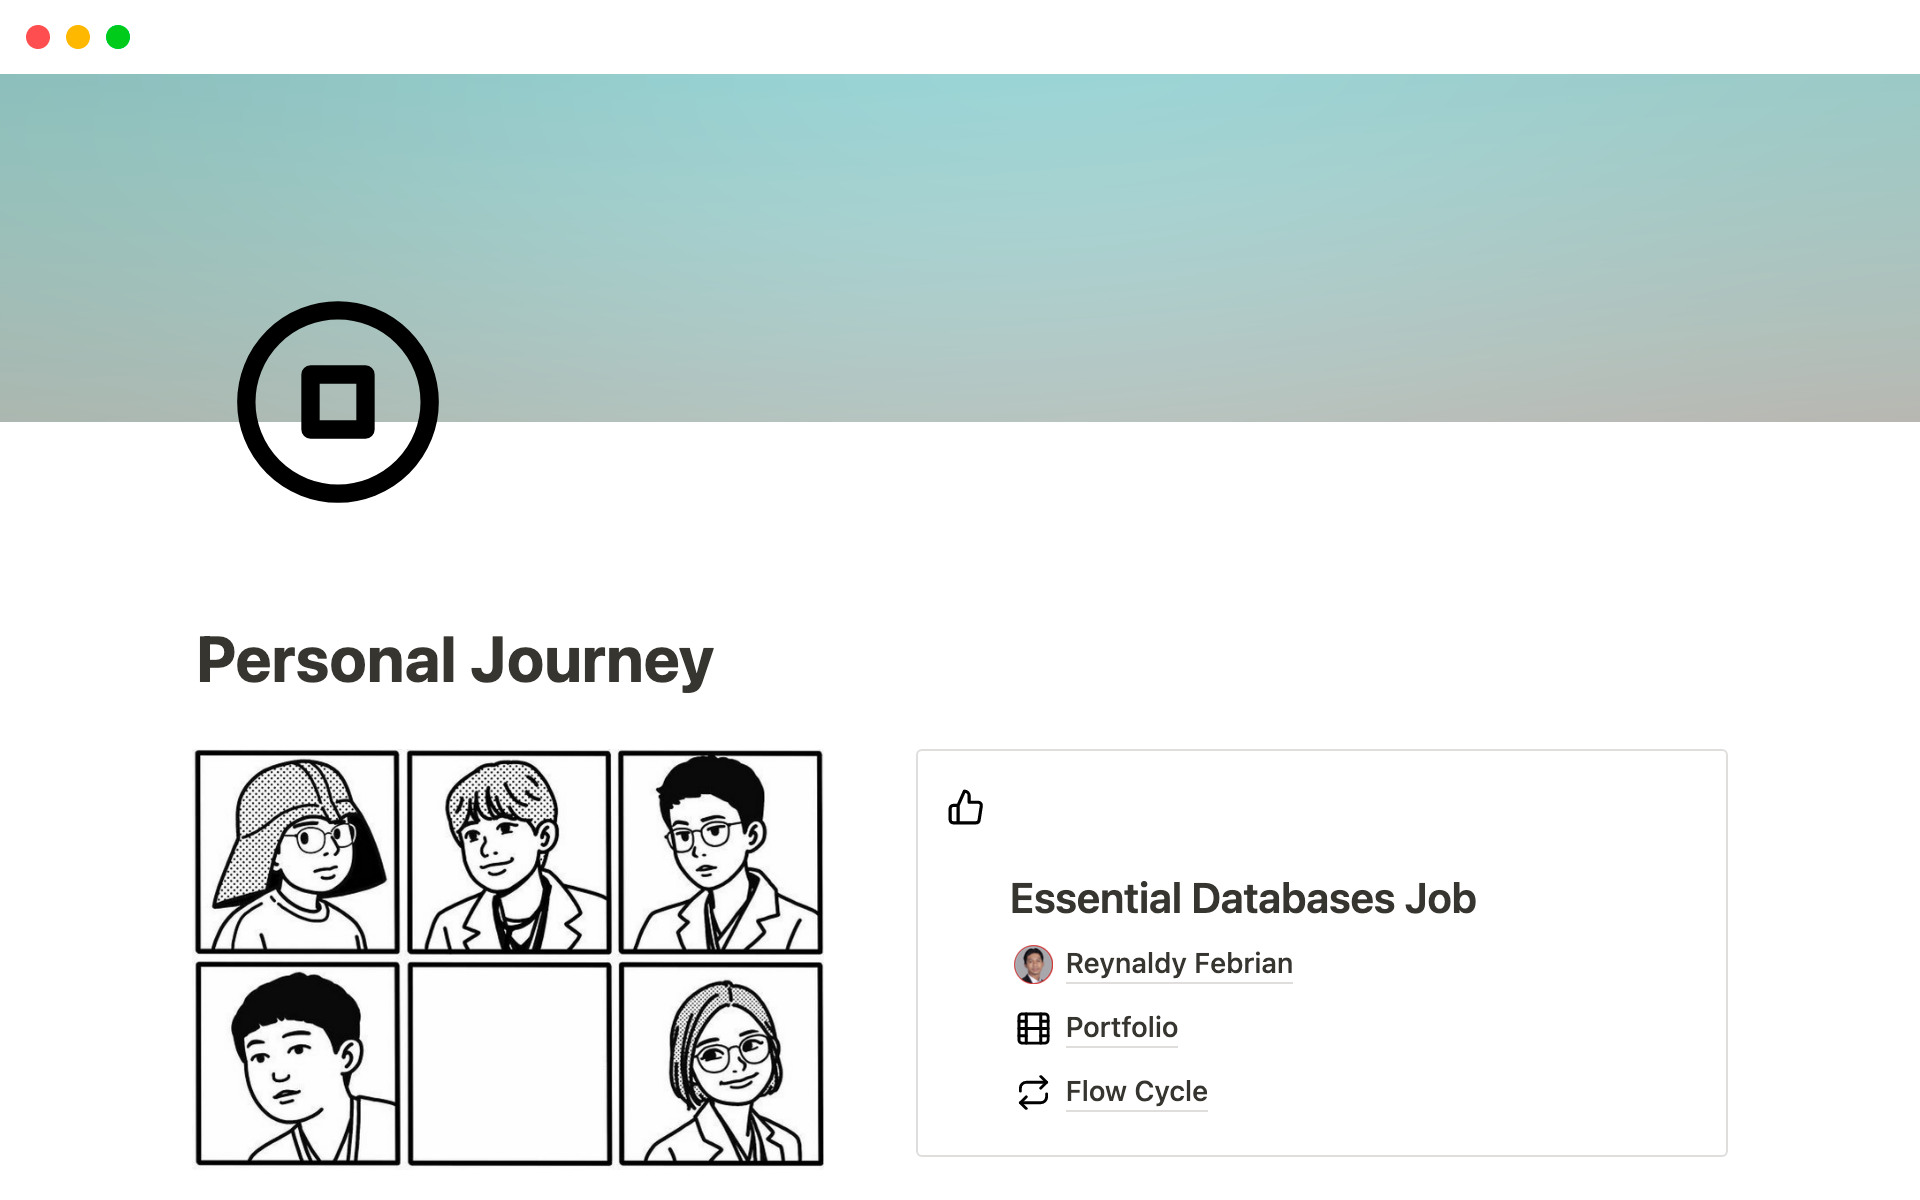 With Career journey, users can easily create a professional-looking resume that showcases their skills, experience, and achievements.